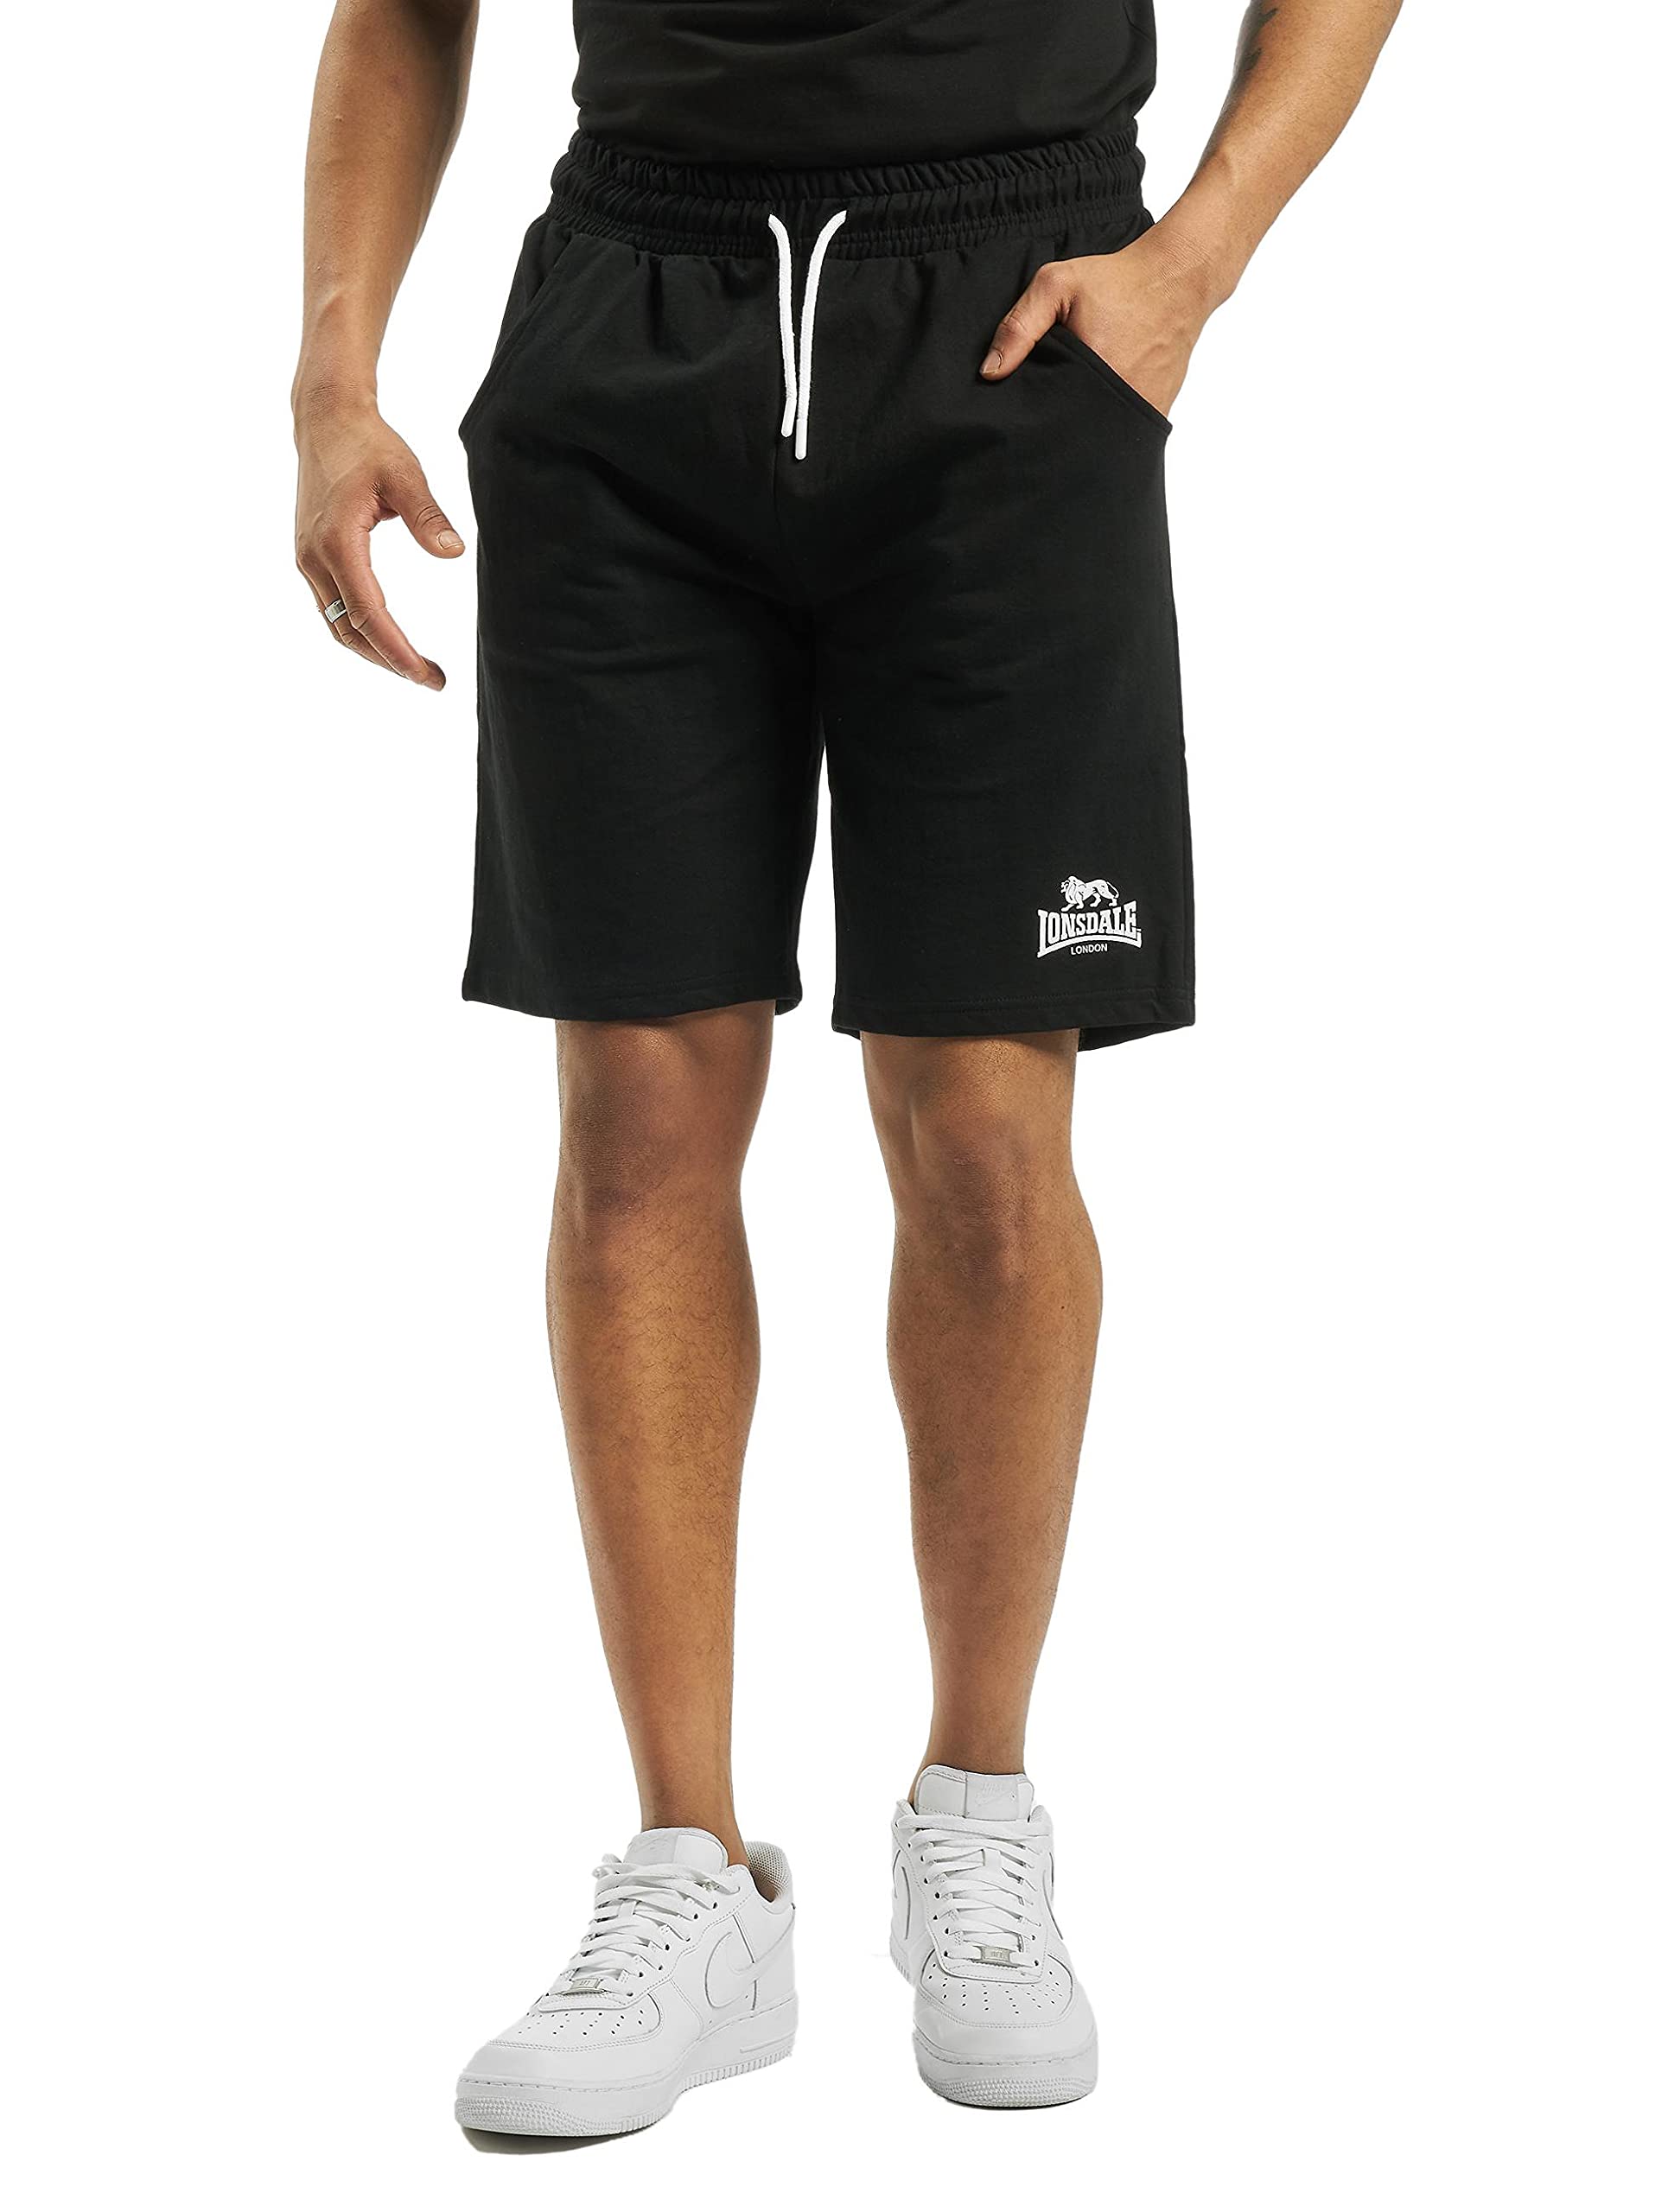 Lonsdale Herren Shorts Normale Passform Coventry, Black/White XL, 113699